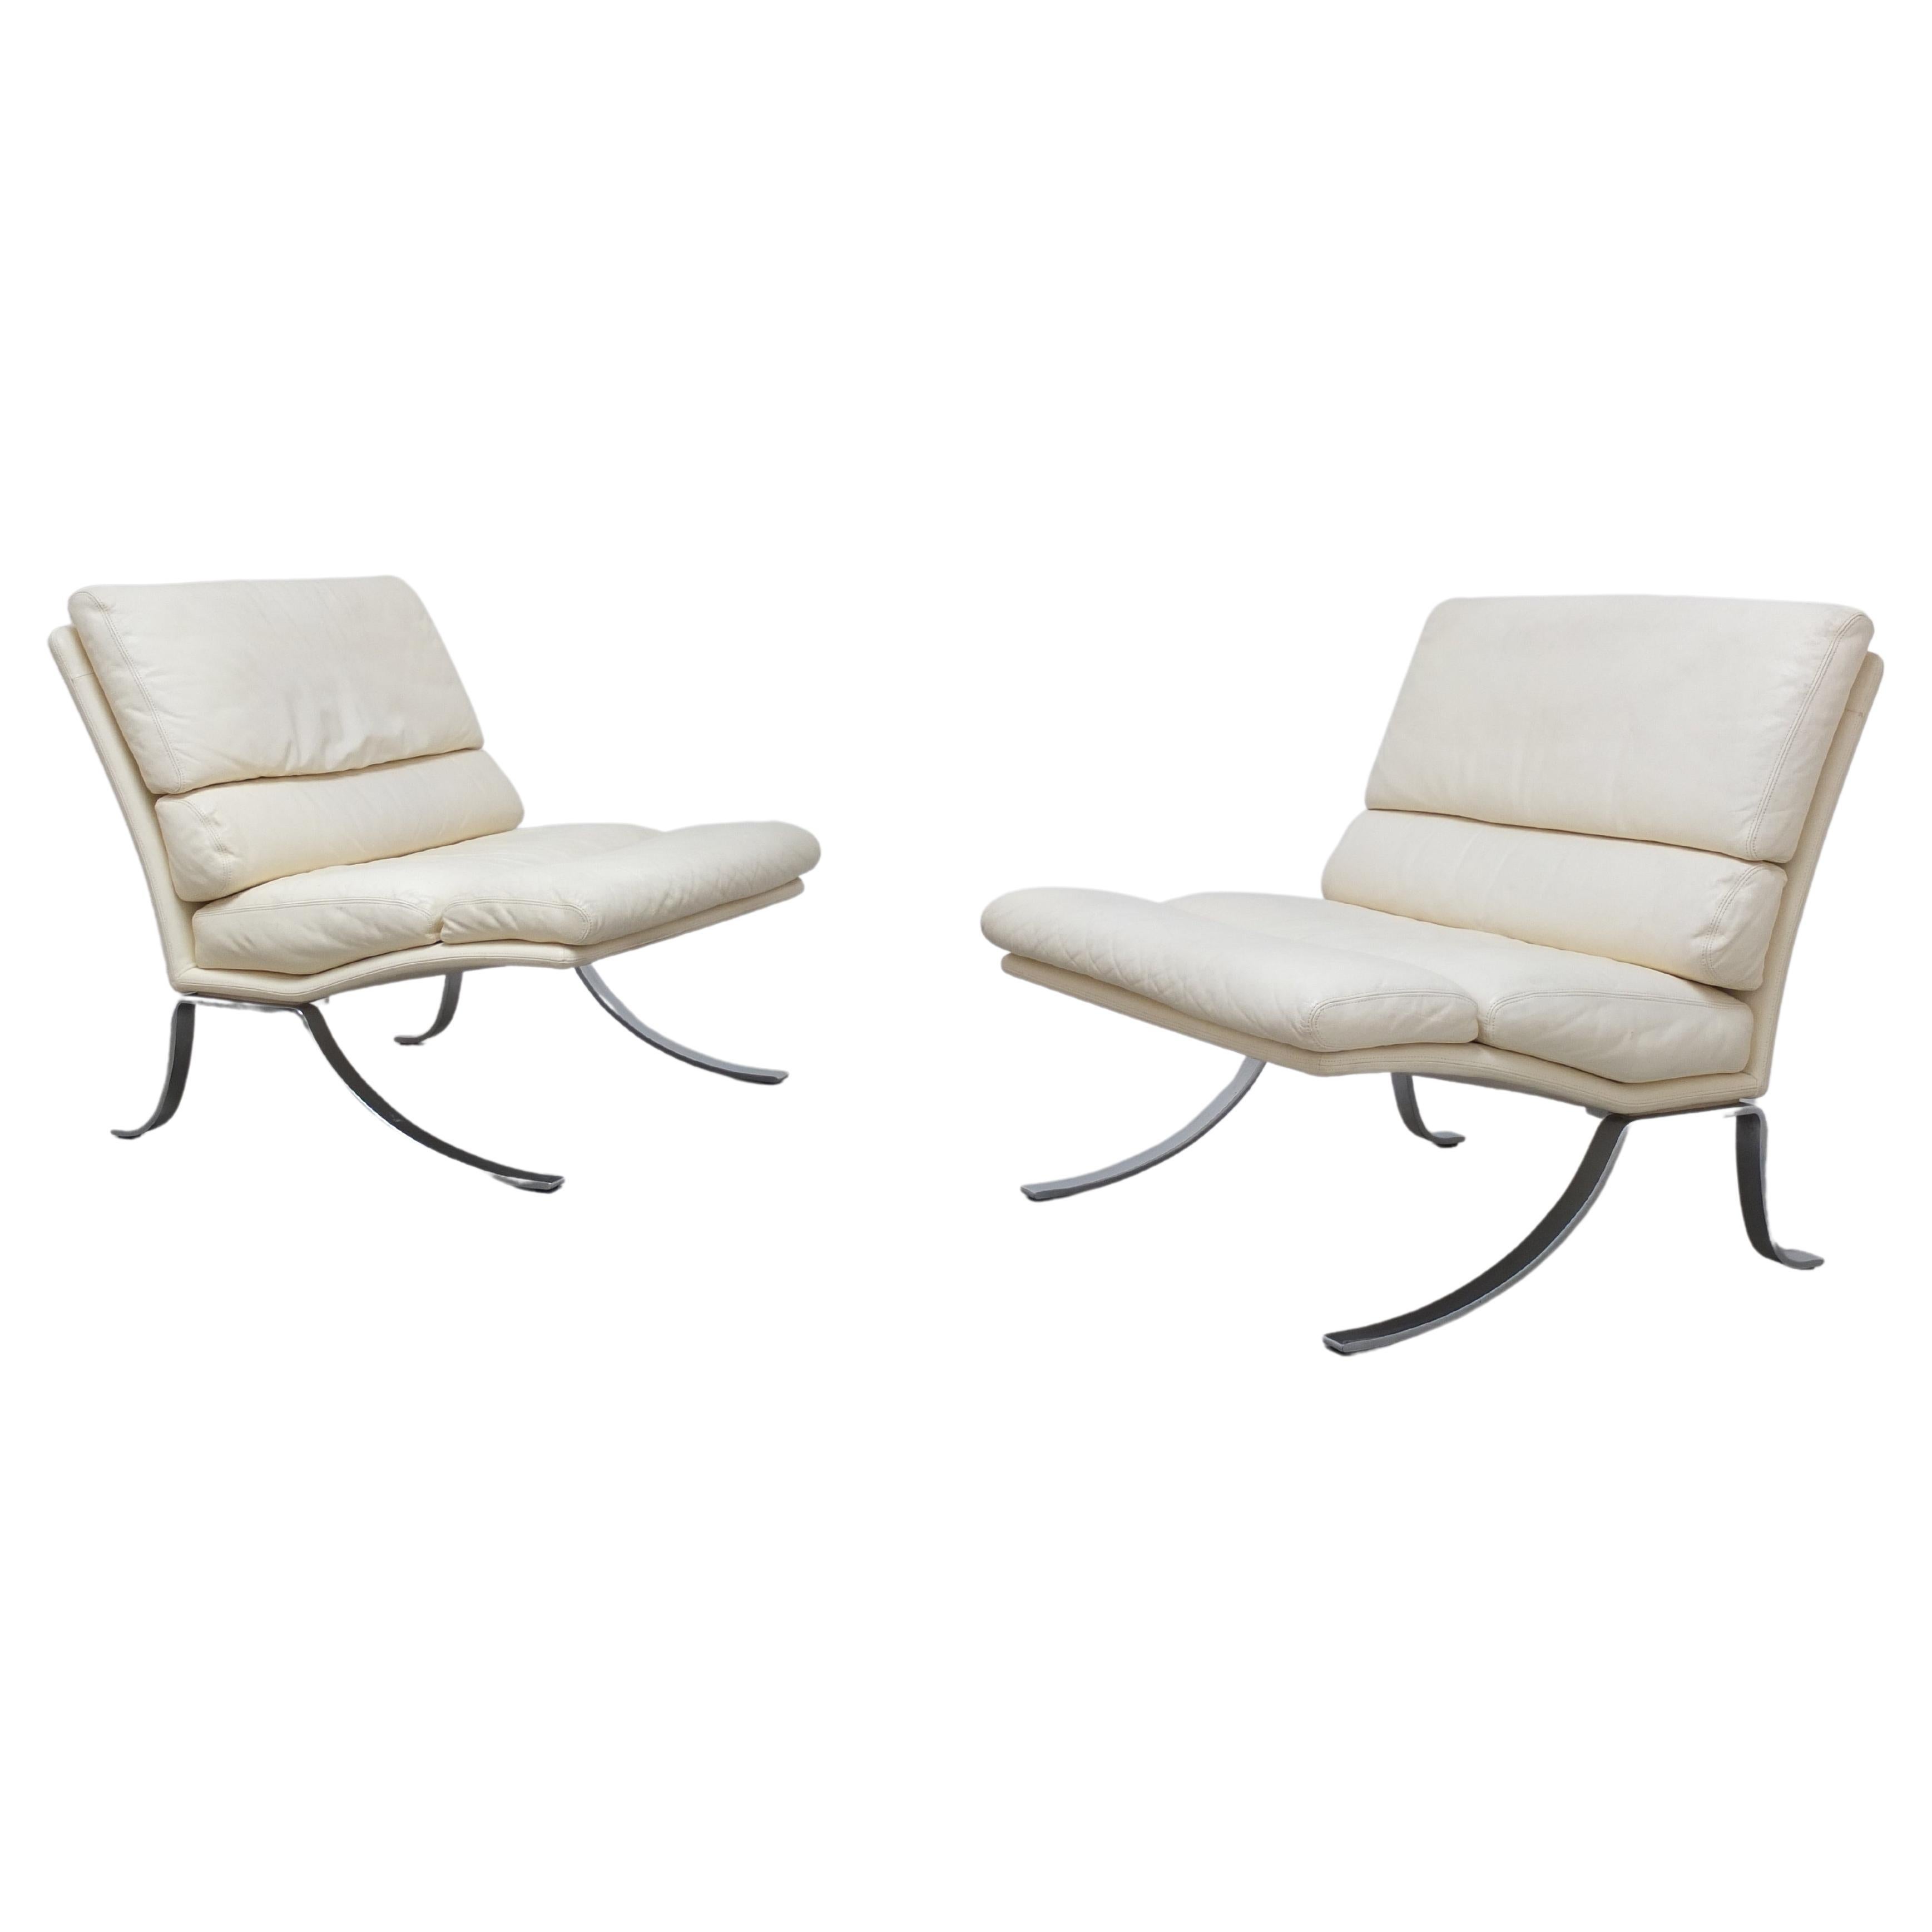 Rare Pair of Belgian Modernist Lounge Chairs with Ottoman by Durlet, 1970s